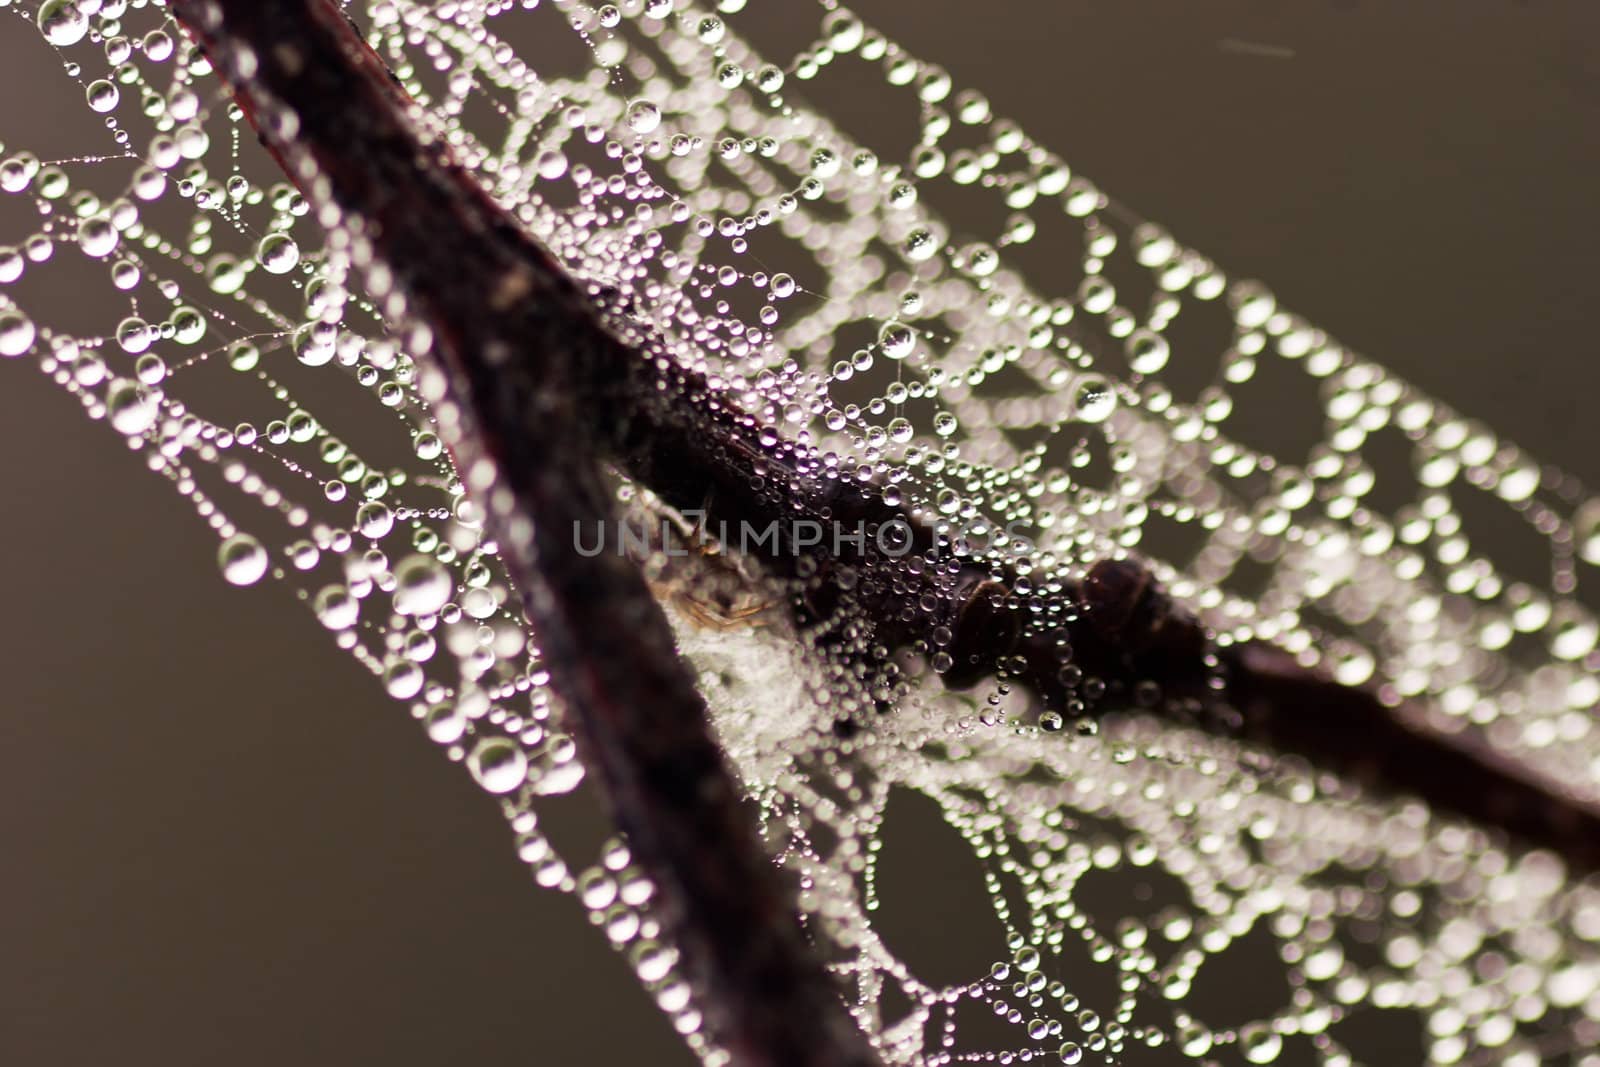 Early morning dew is trapped on a spiderweb and branch. The spider is just visible under the join.